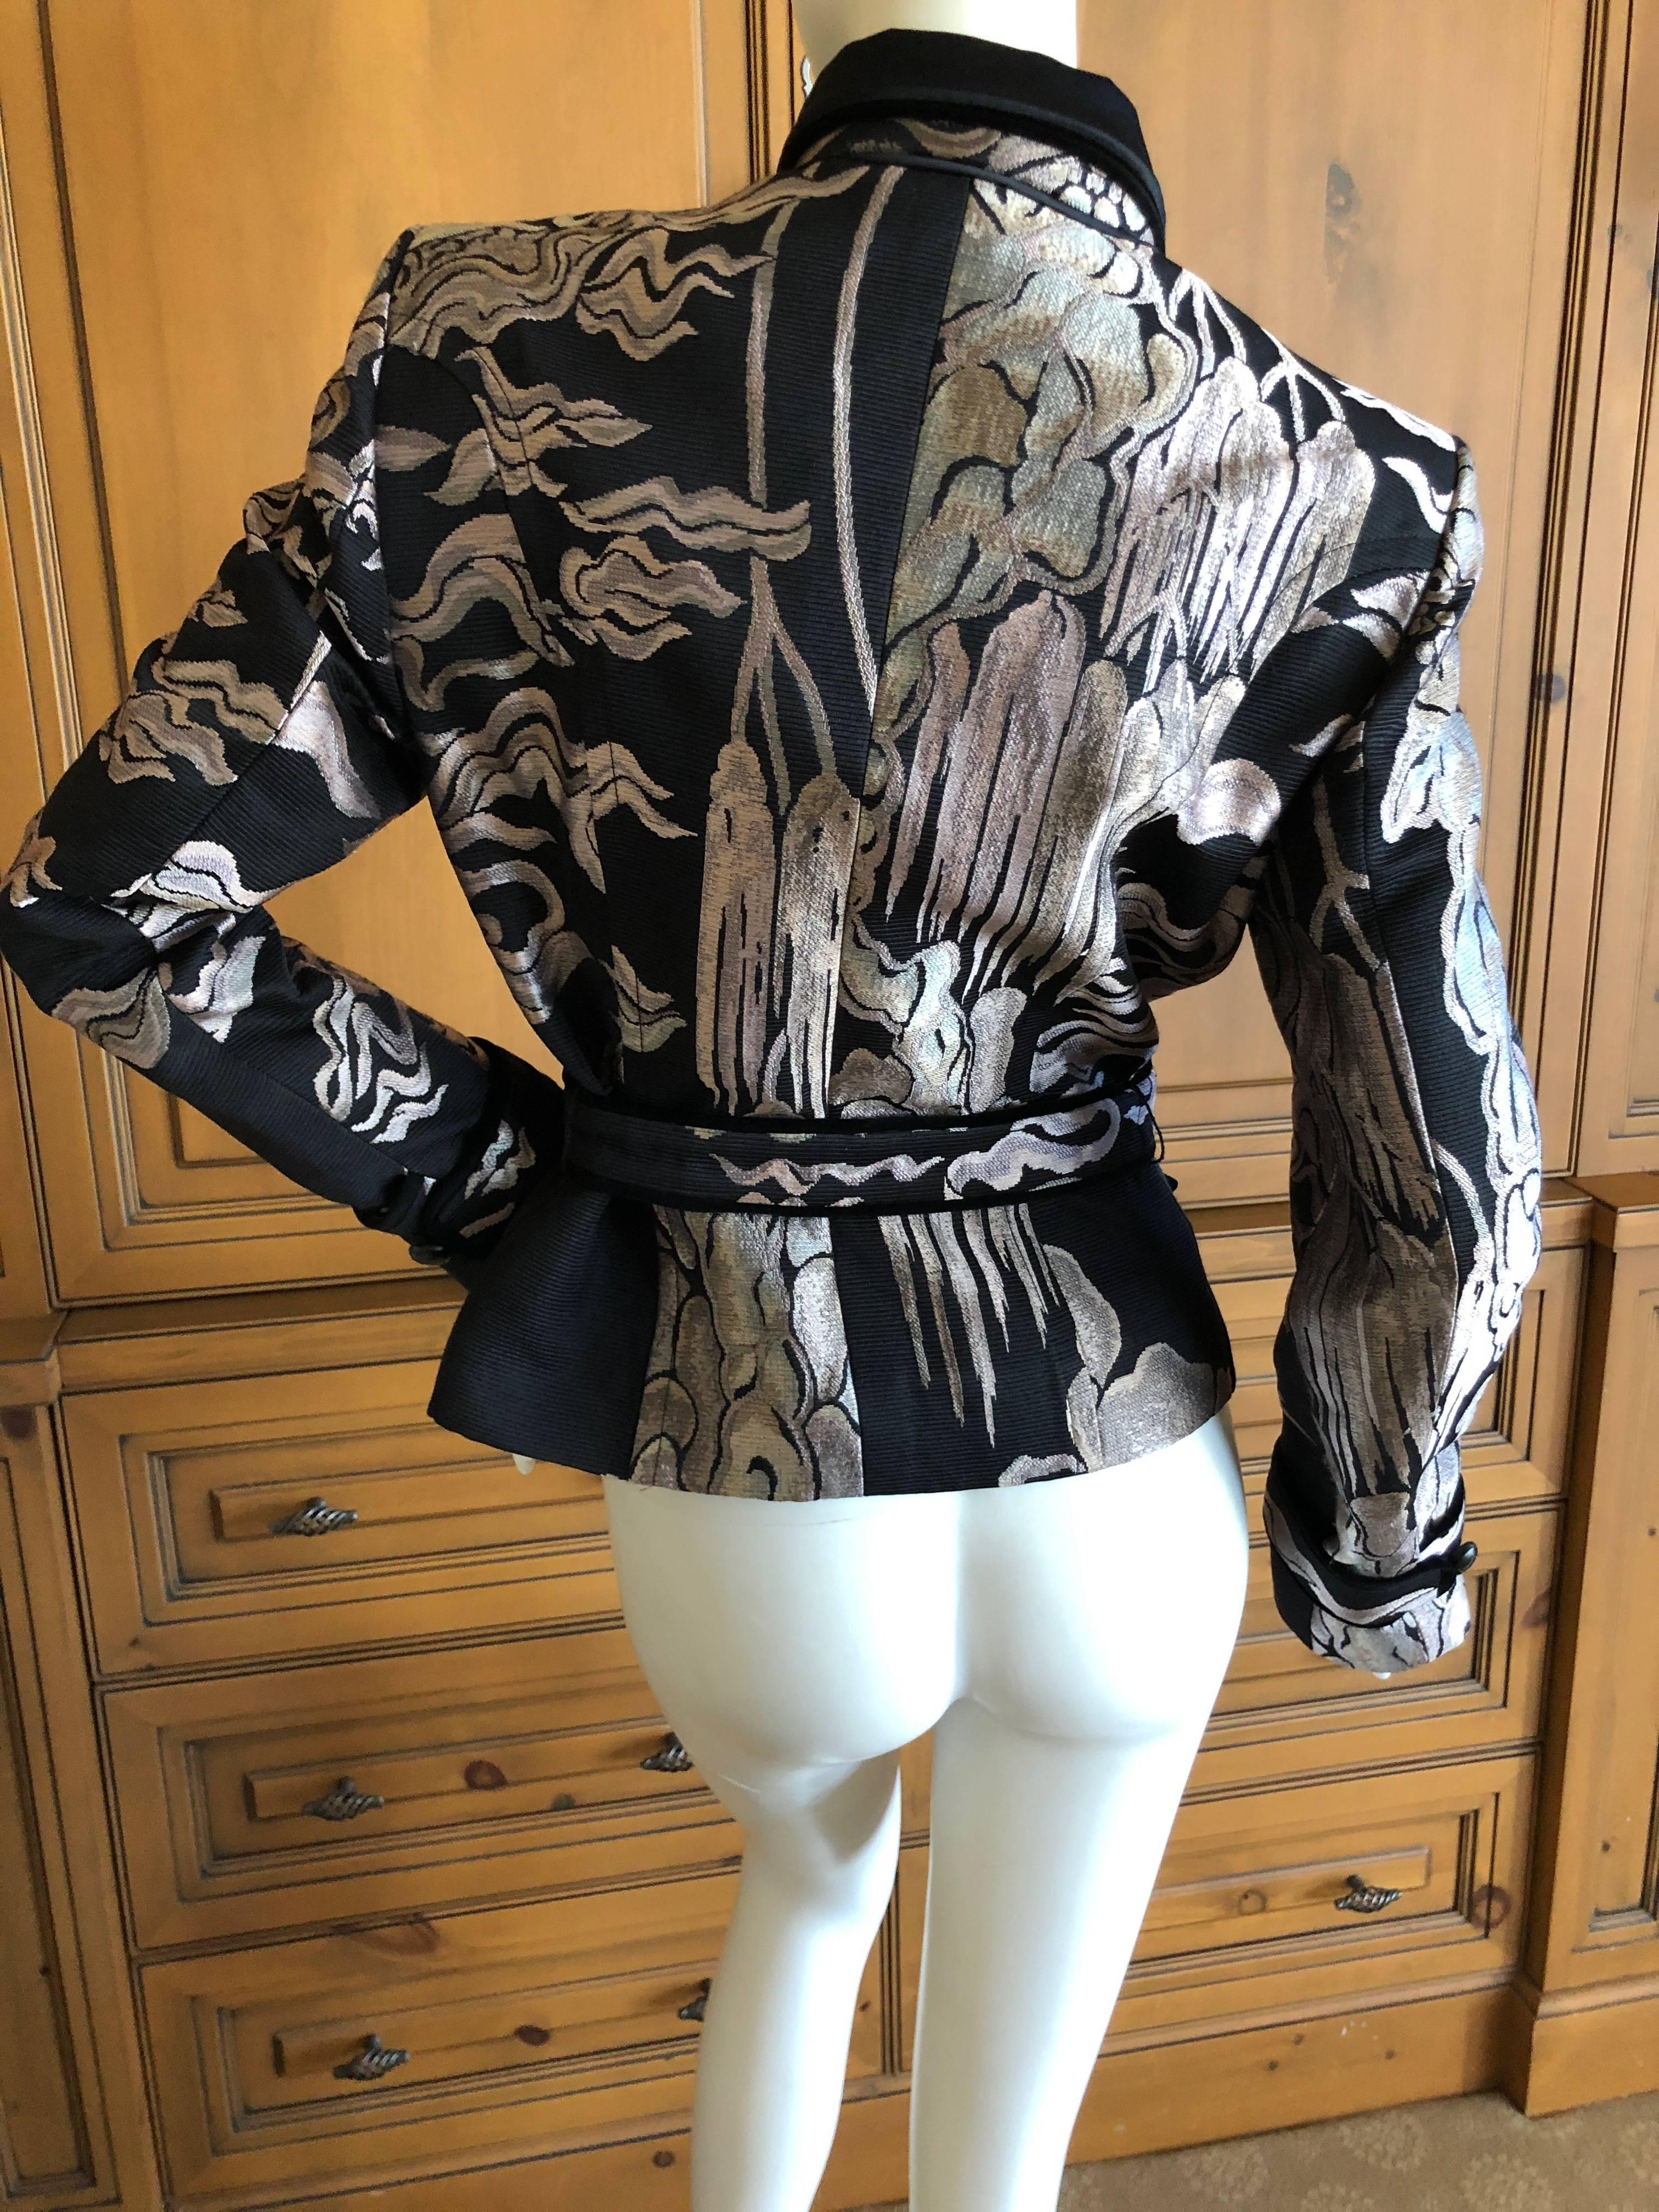 Yves Saint Laurent by Tom Ford Fall 2004 Chinoiserie Jacquard Jacket For Sale 4